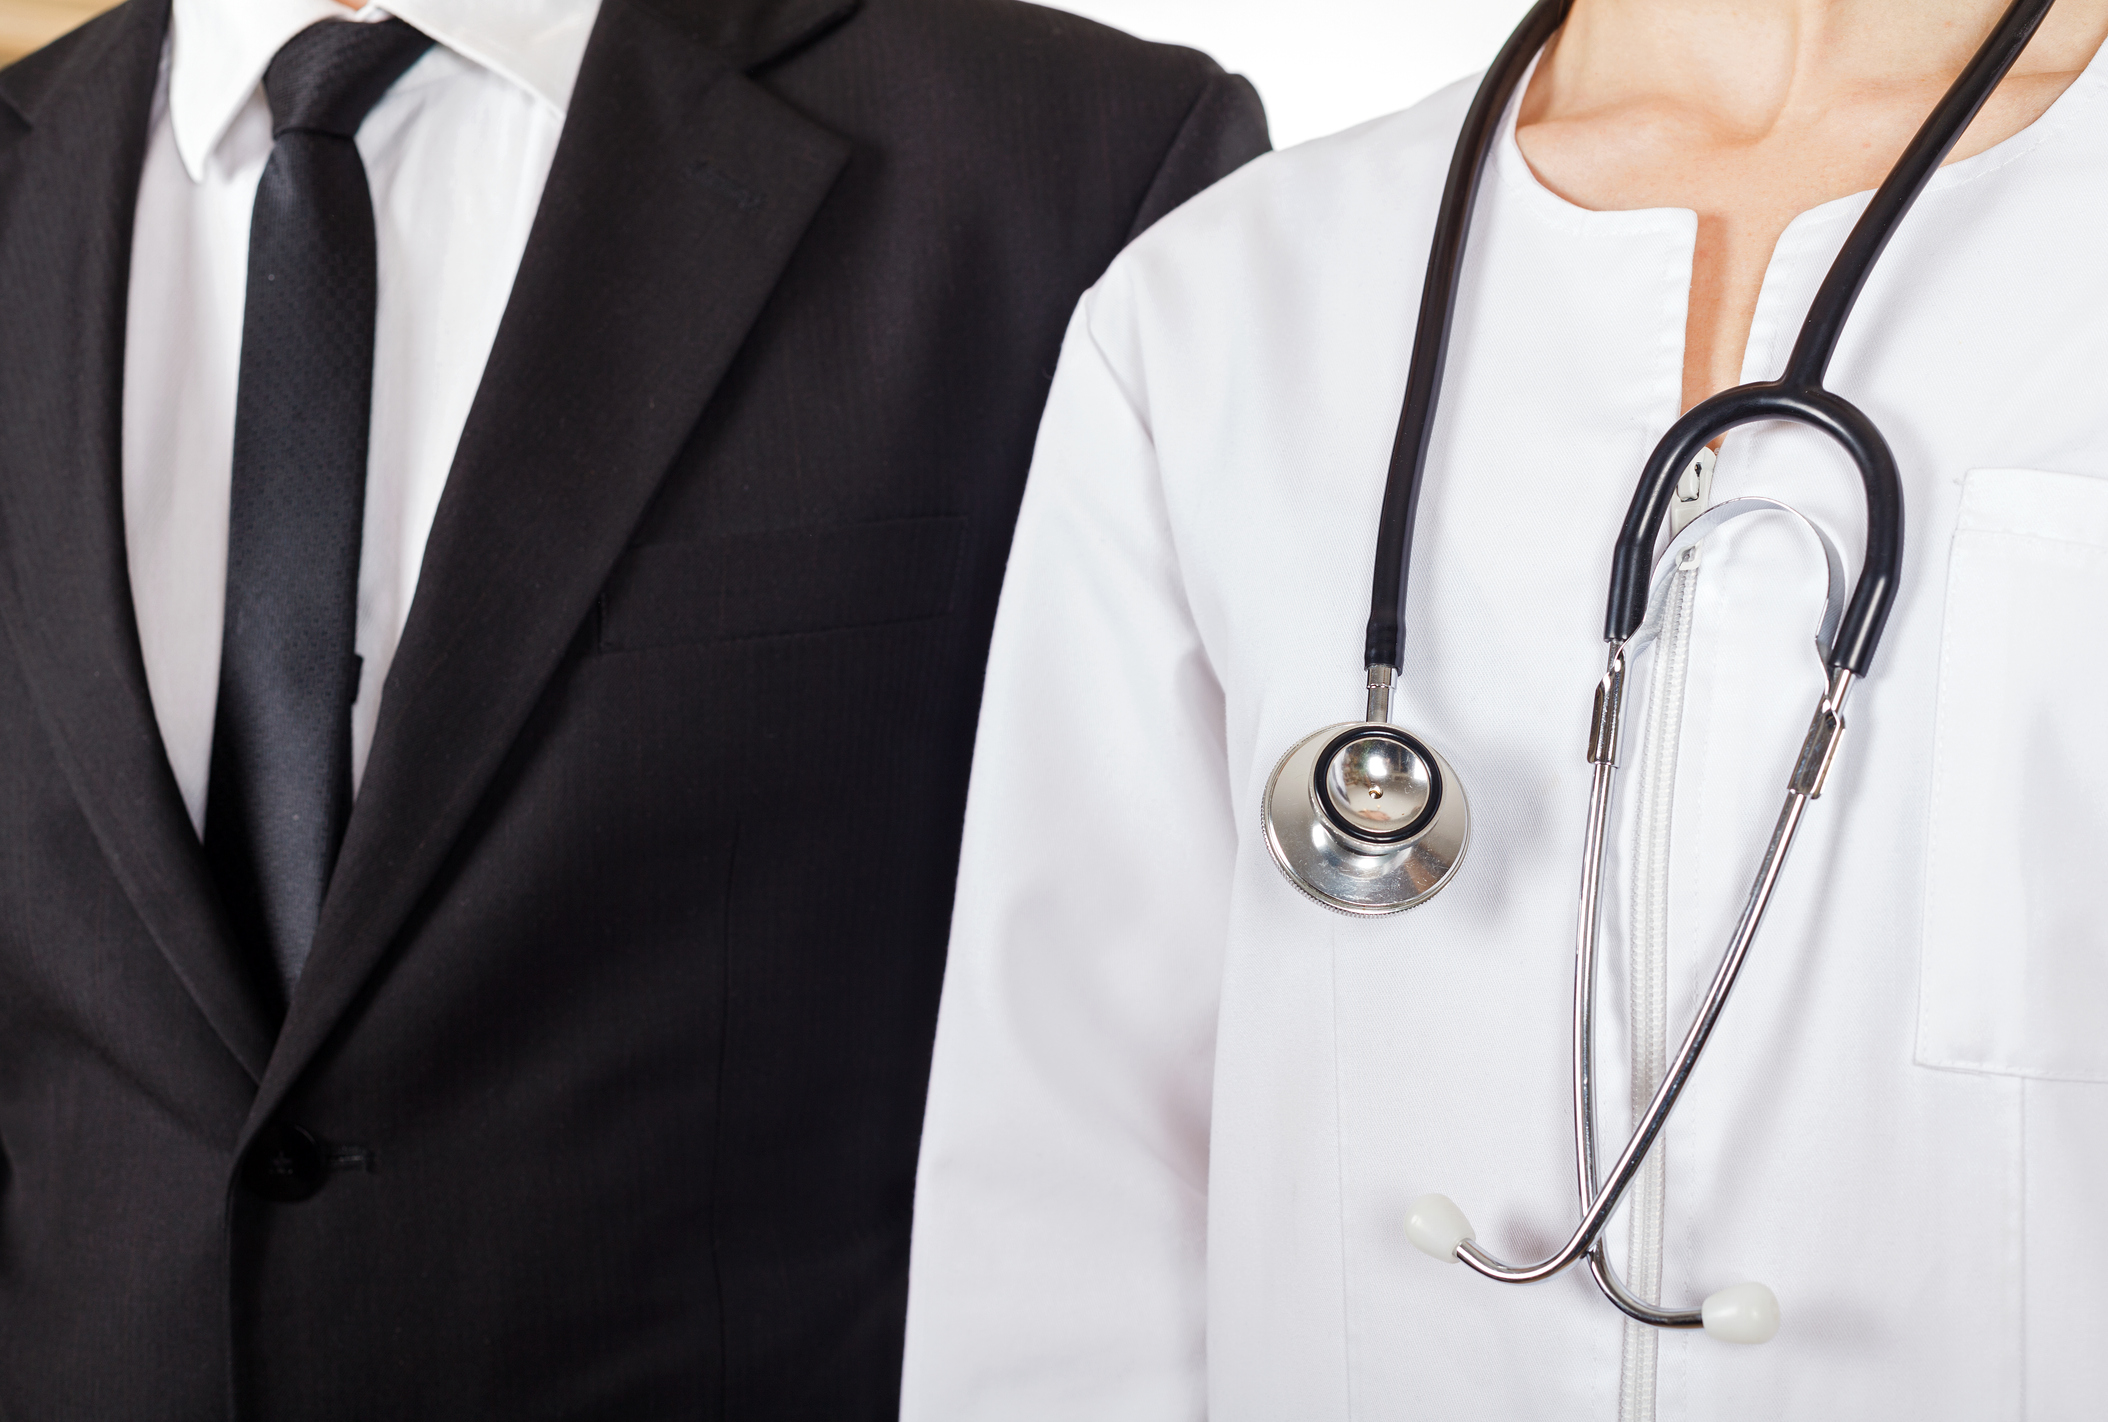 How the Costs of Malpractice Suits Affect Physicians